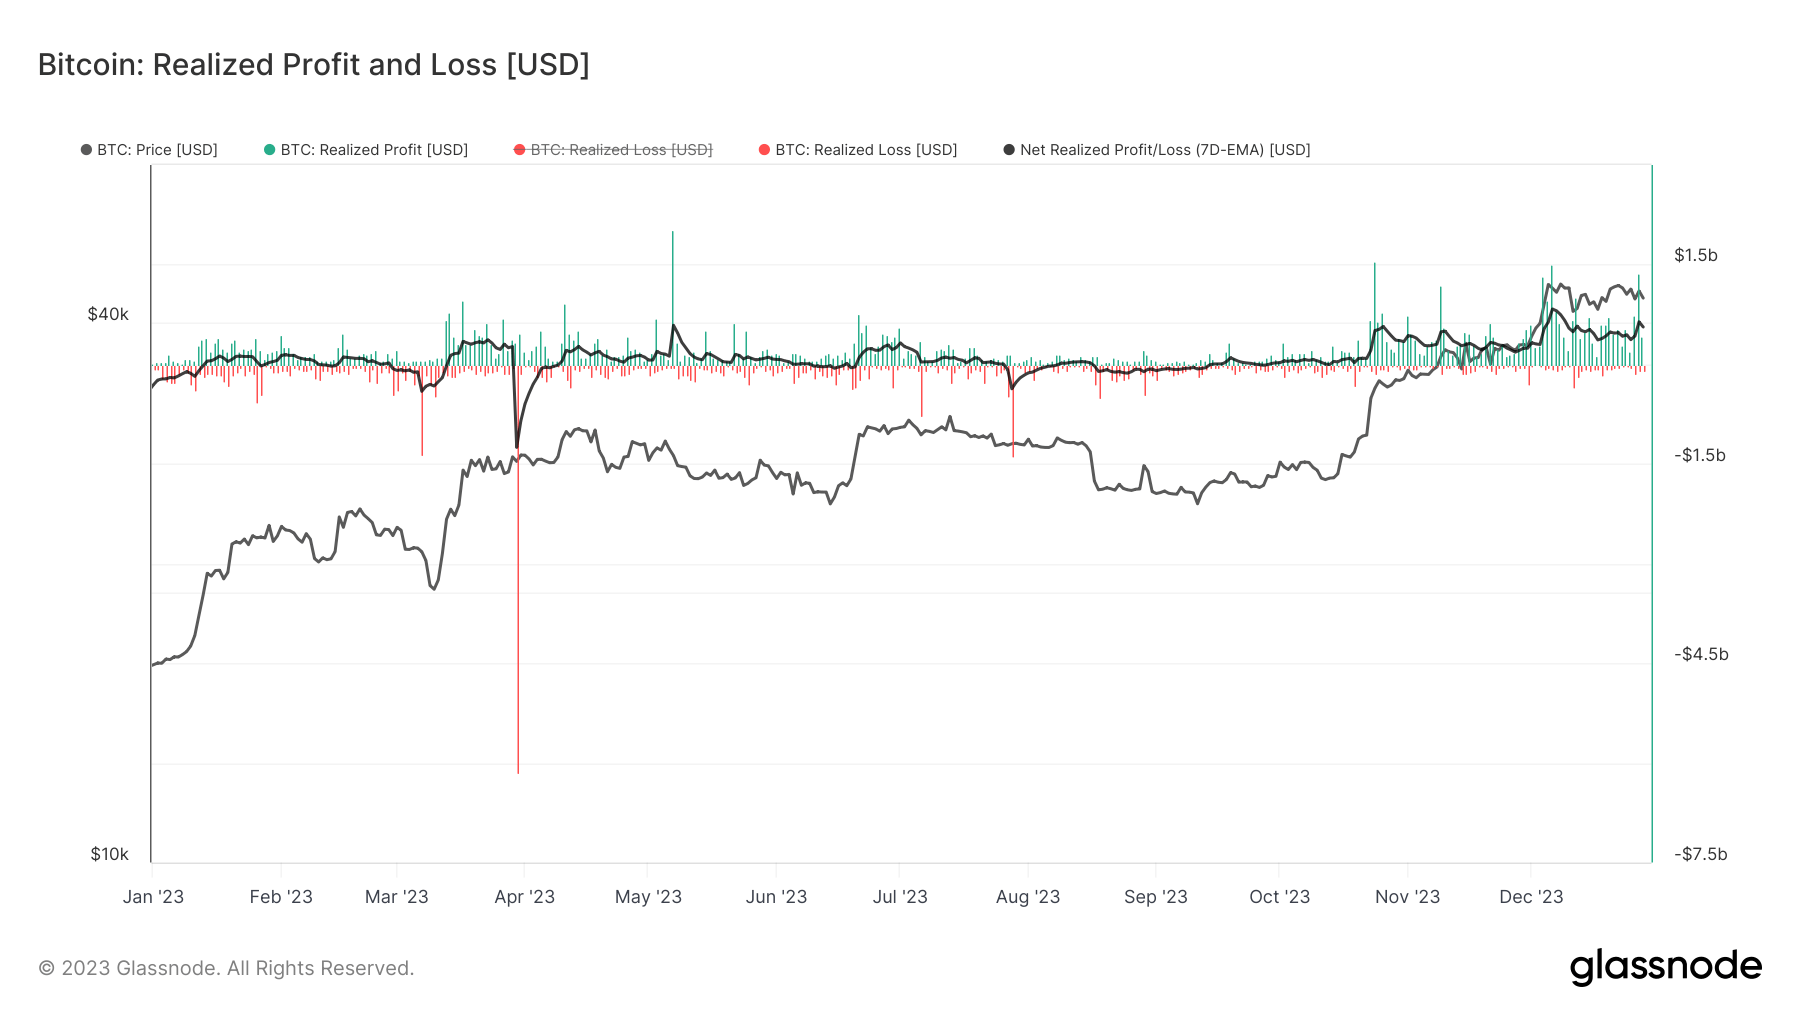 Realized Profit and Loss: (Source: Glassnode)